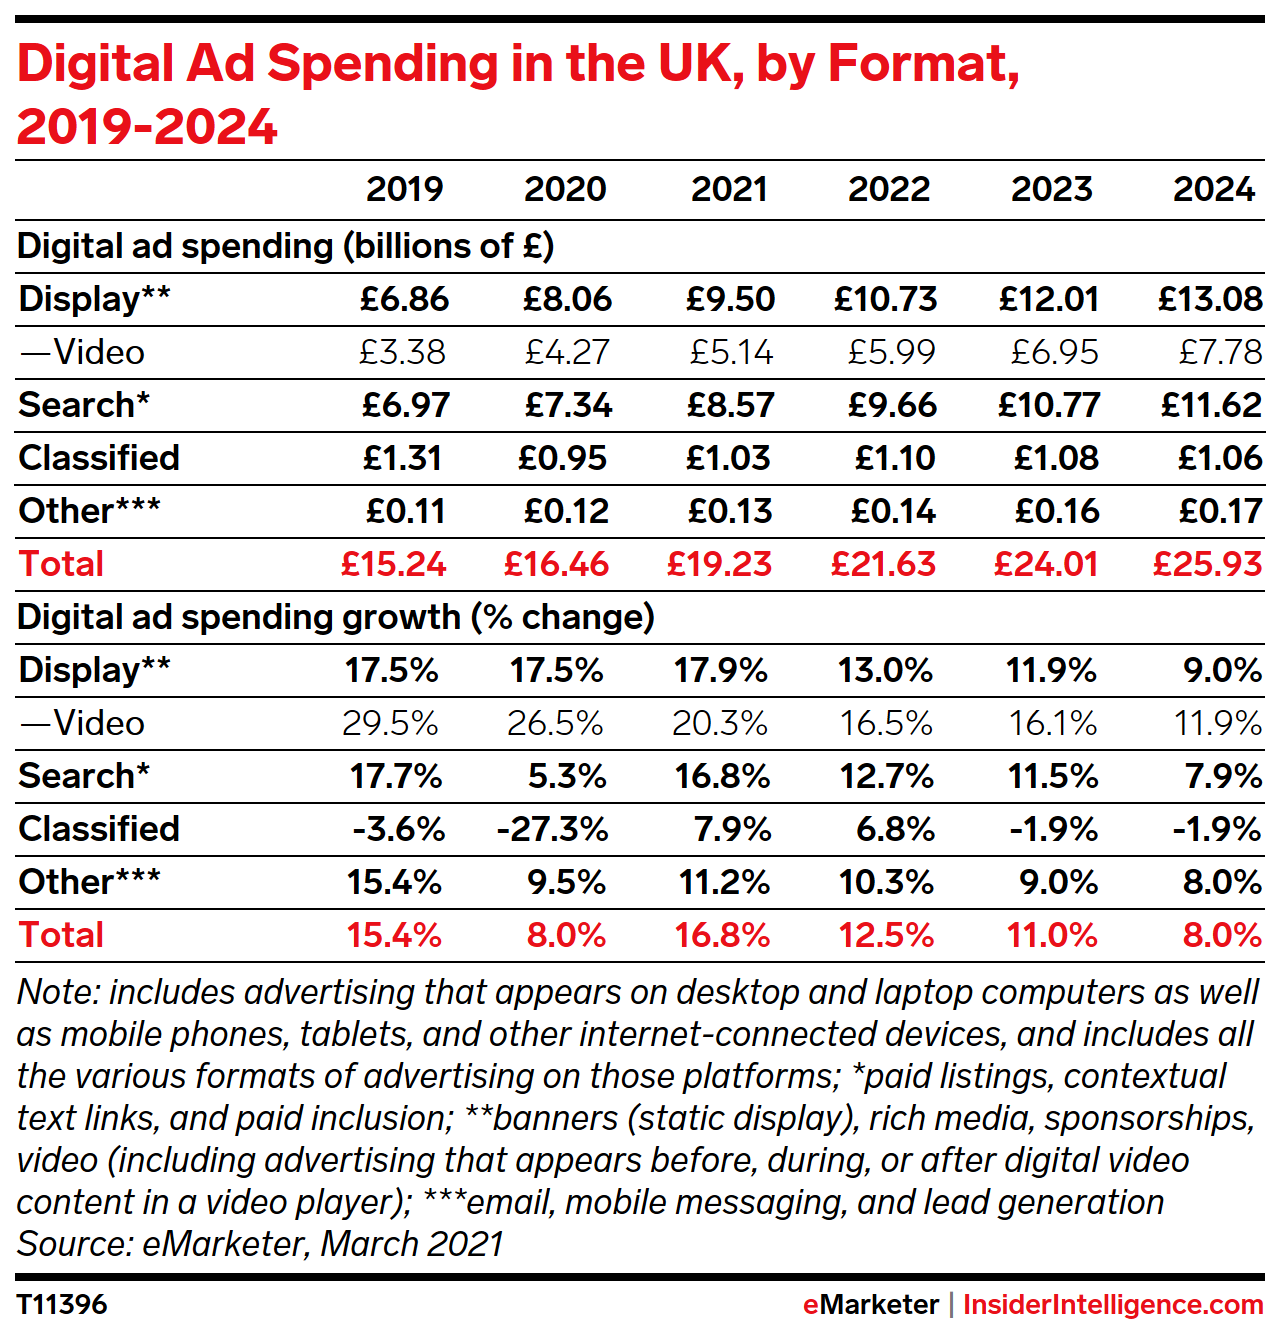 Digital Ad Spending in the UK, by Format, 2019-2024 (billions of £ and % change)